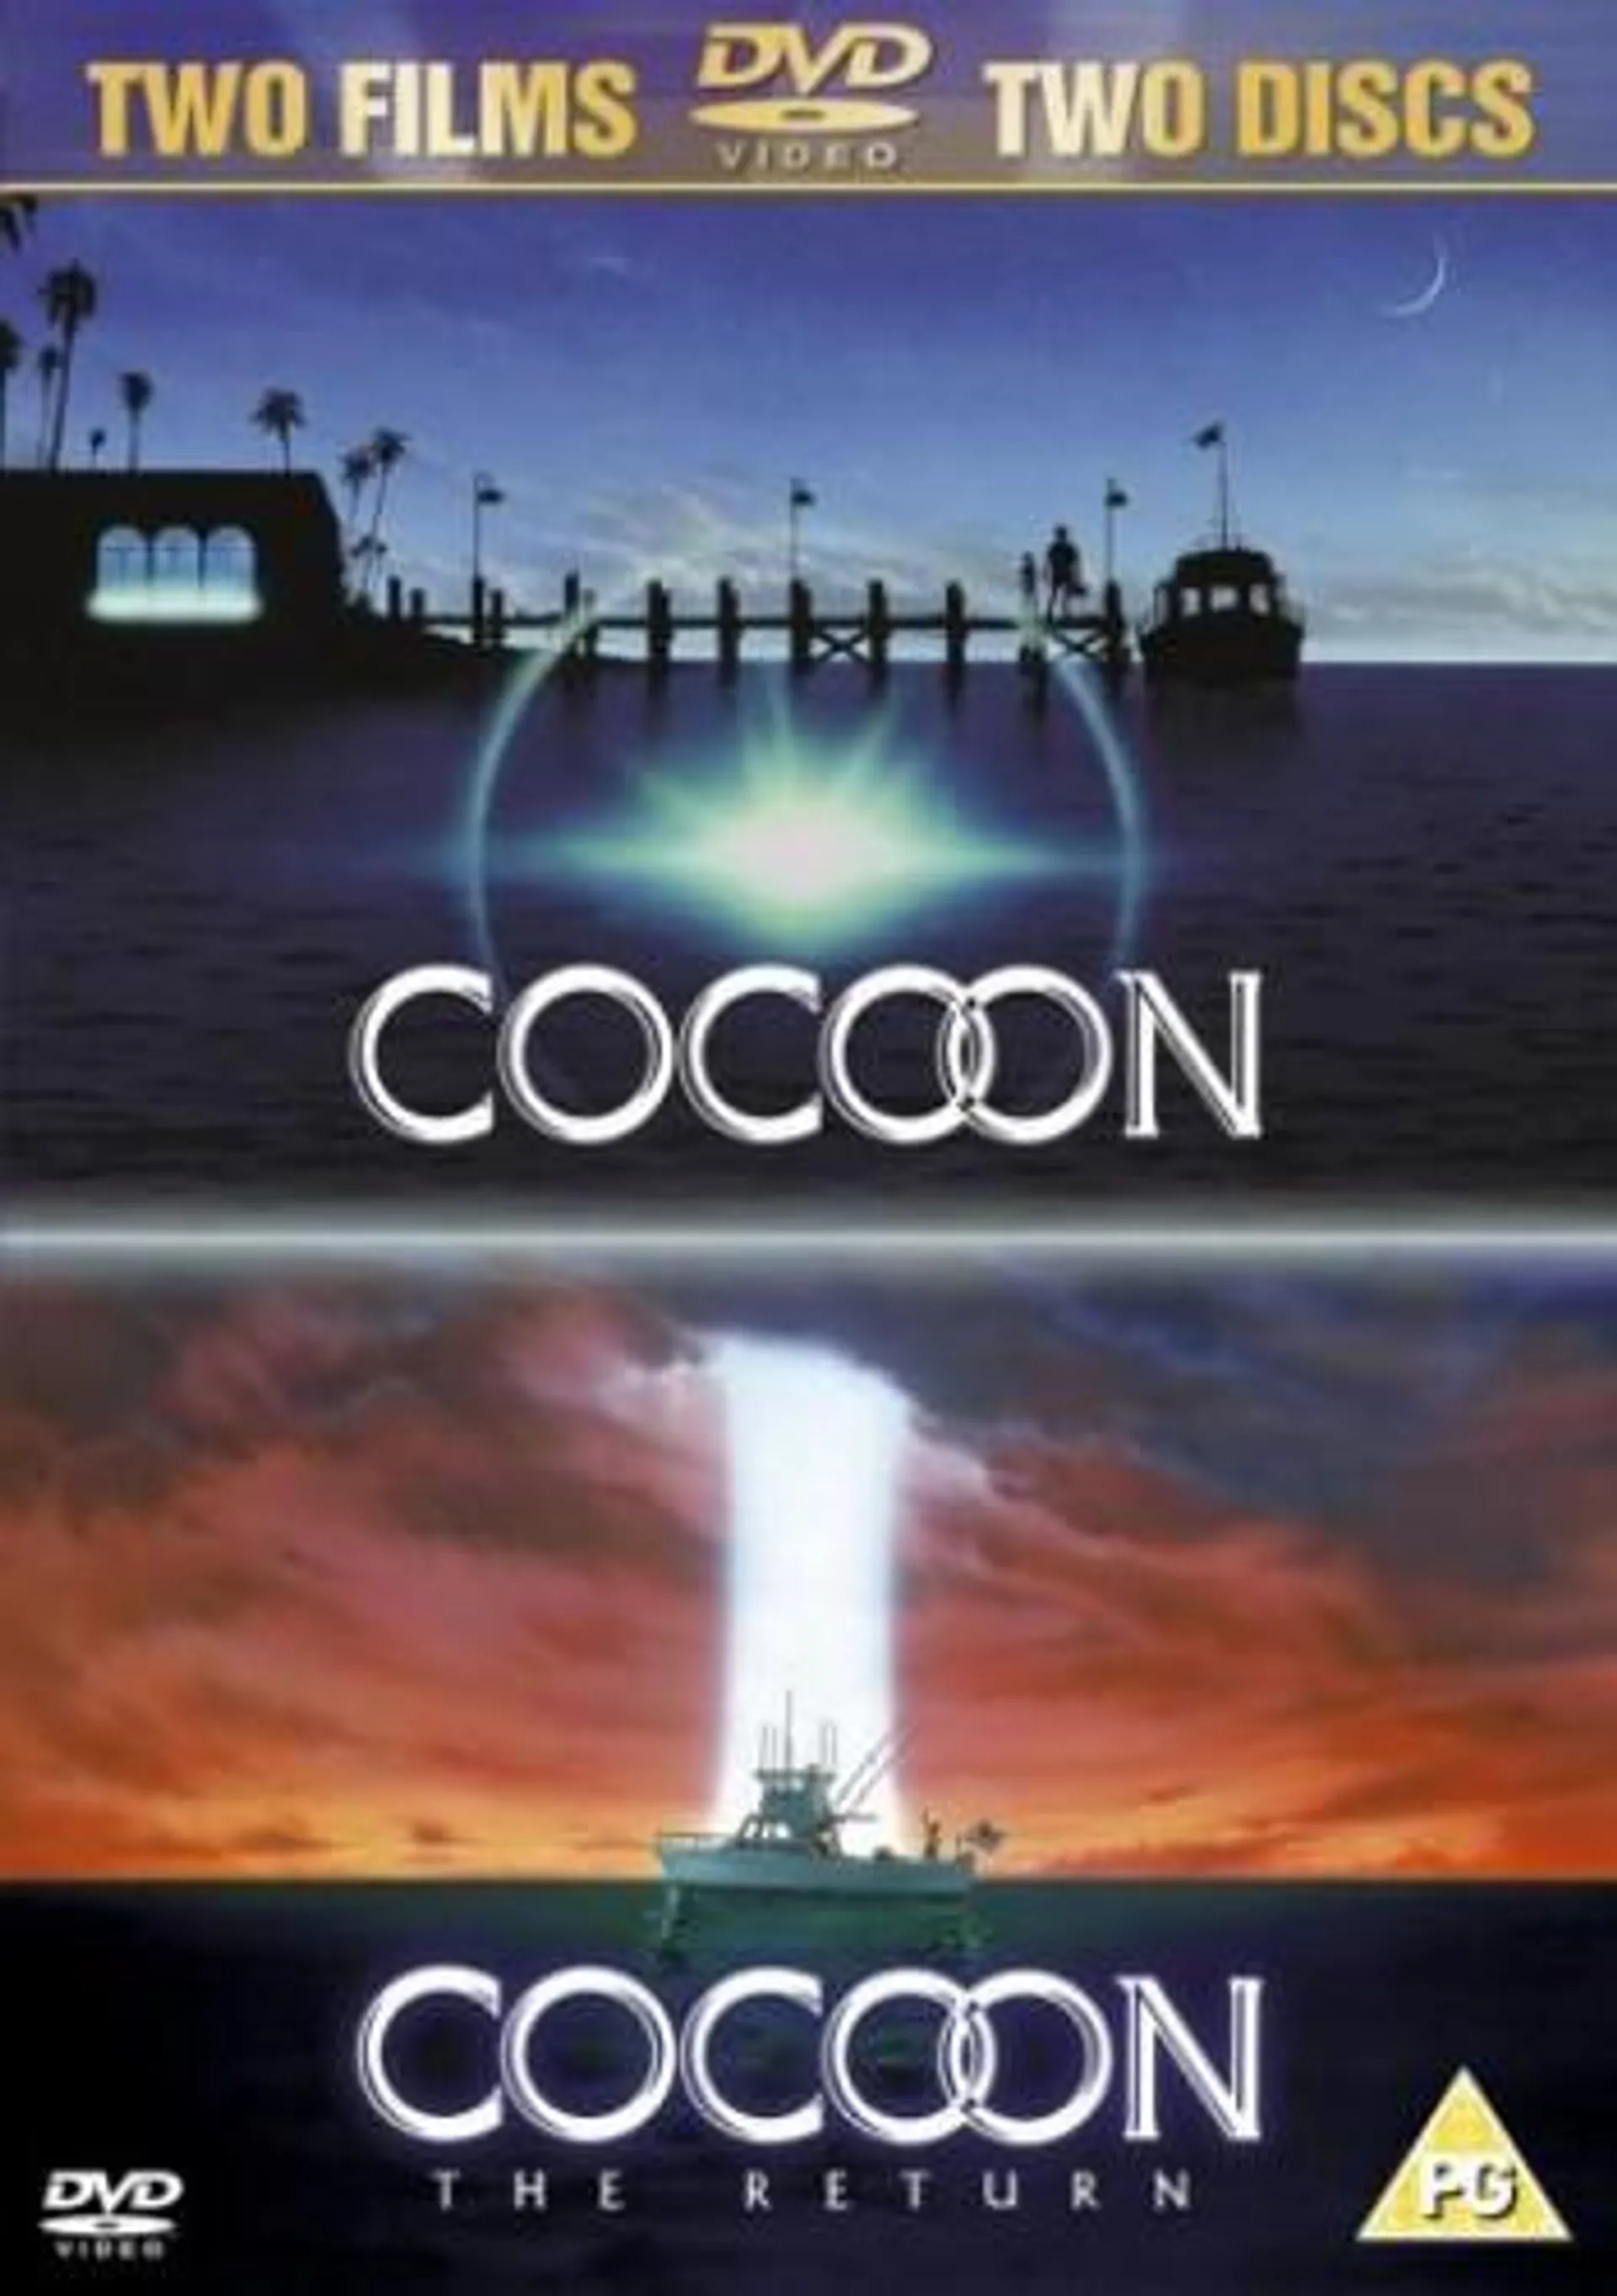 Cocoon / Cocoon: The Return